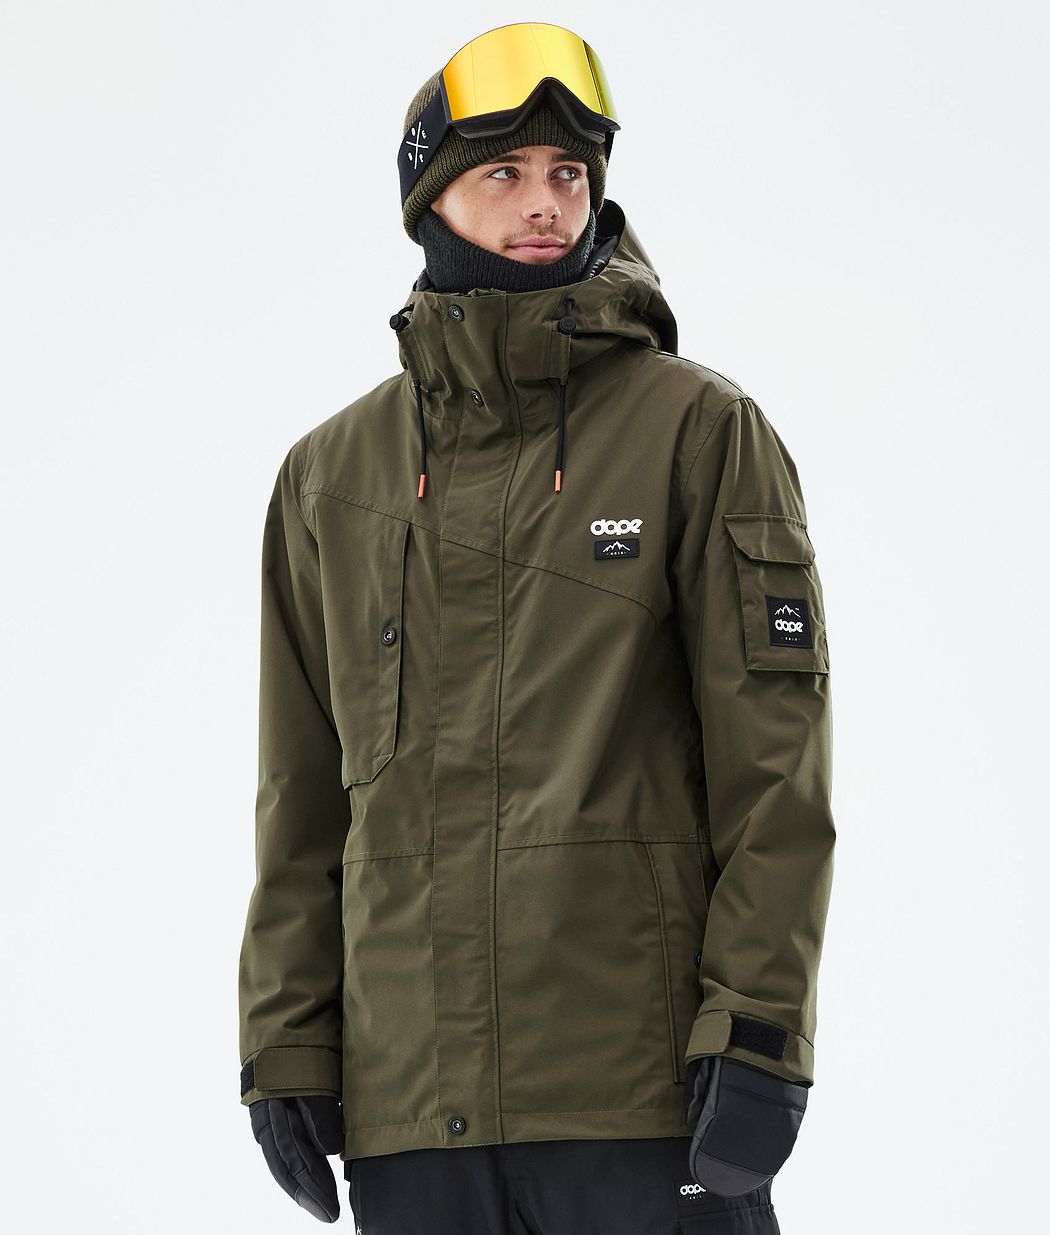 Adept Giacca Snowboard Uomo Olive Green